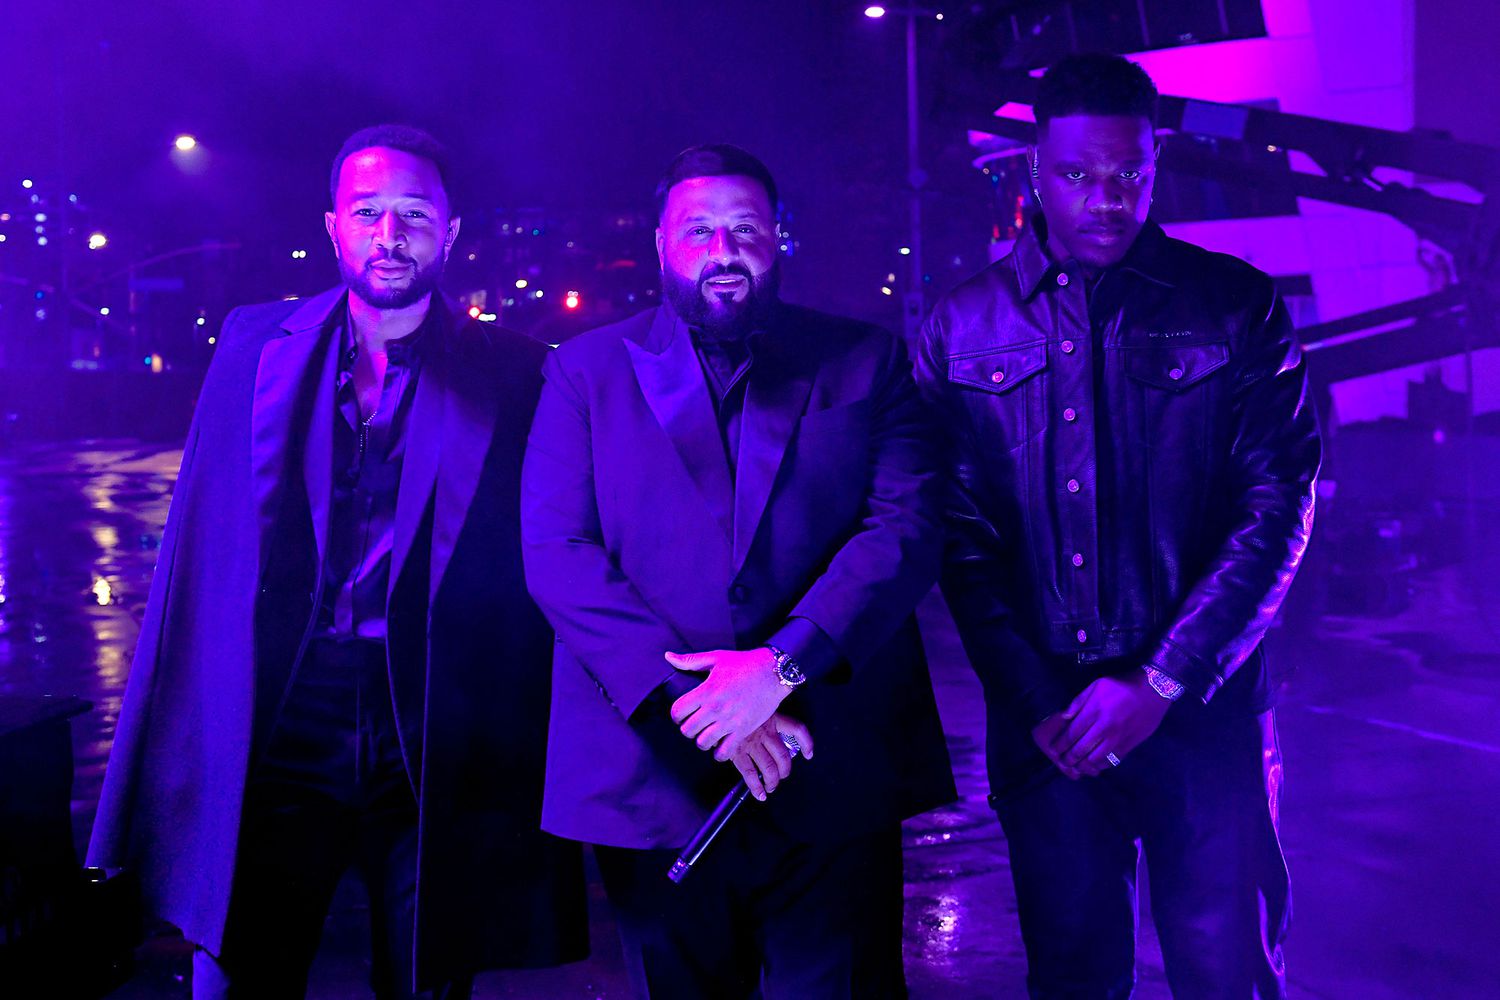 John Legend, DJ Khaled and Fridayy pose during performs onstage during the 65th GRAMMY Awards at Crypto.com Arena in Los Angeles, California.